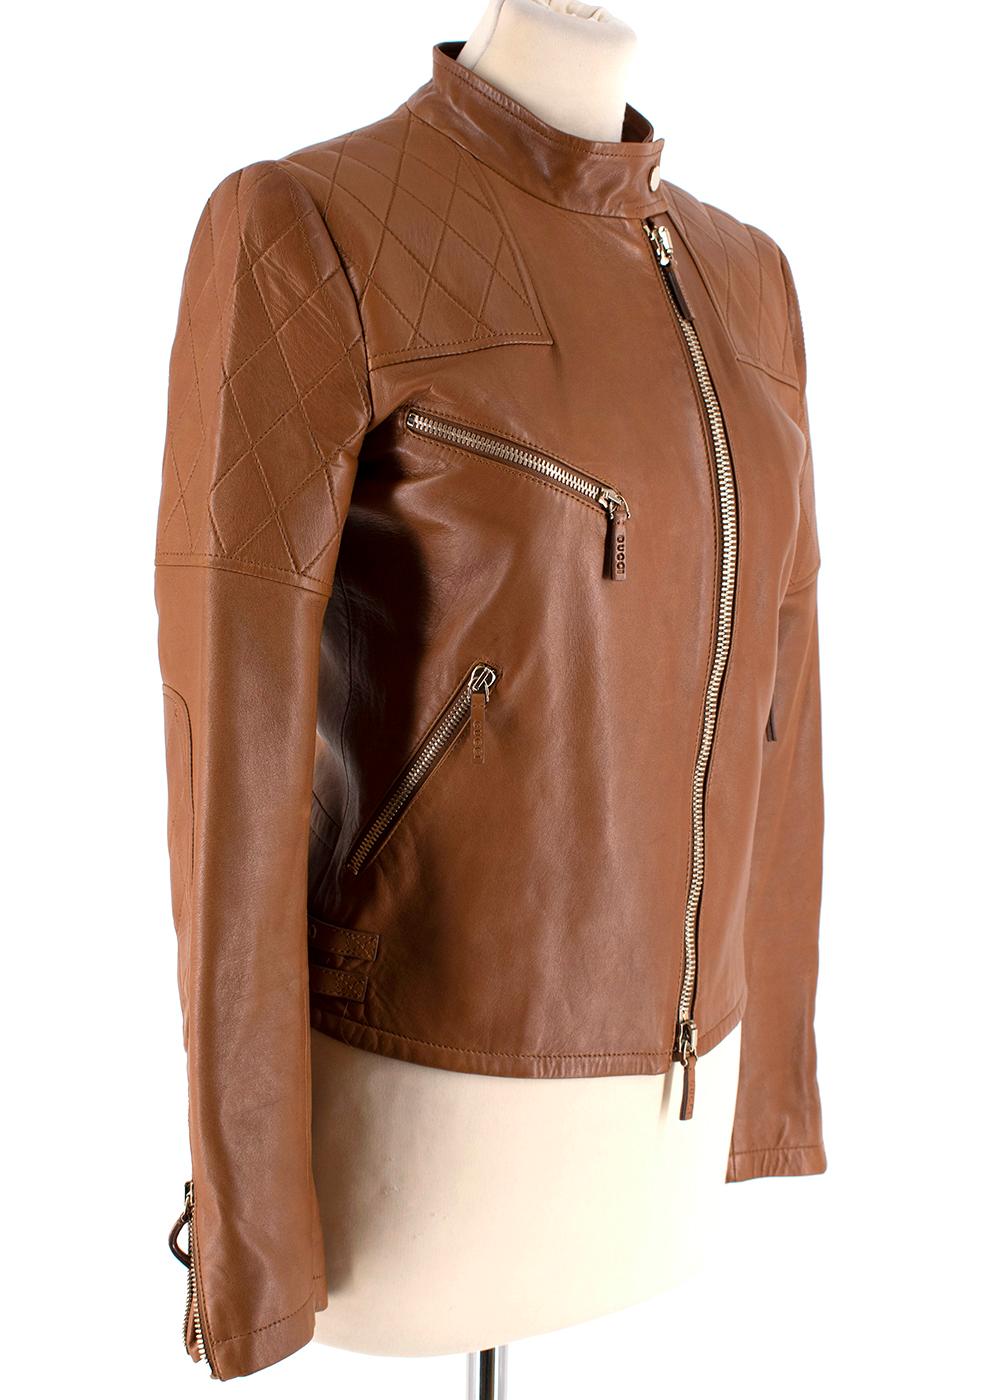 Gucci Tan Leather Asymmetric Biker Jacket

- Quilted pattern on the upper body and patched elbows
- Gold zipped hardware
- Soft lambskin
- Zipped side pockets (X3)
- Gucci embossed zip tassels
- Side belt detailing in gold to accentuate the hips
-